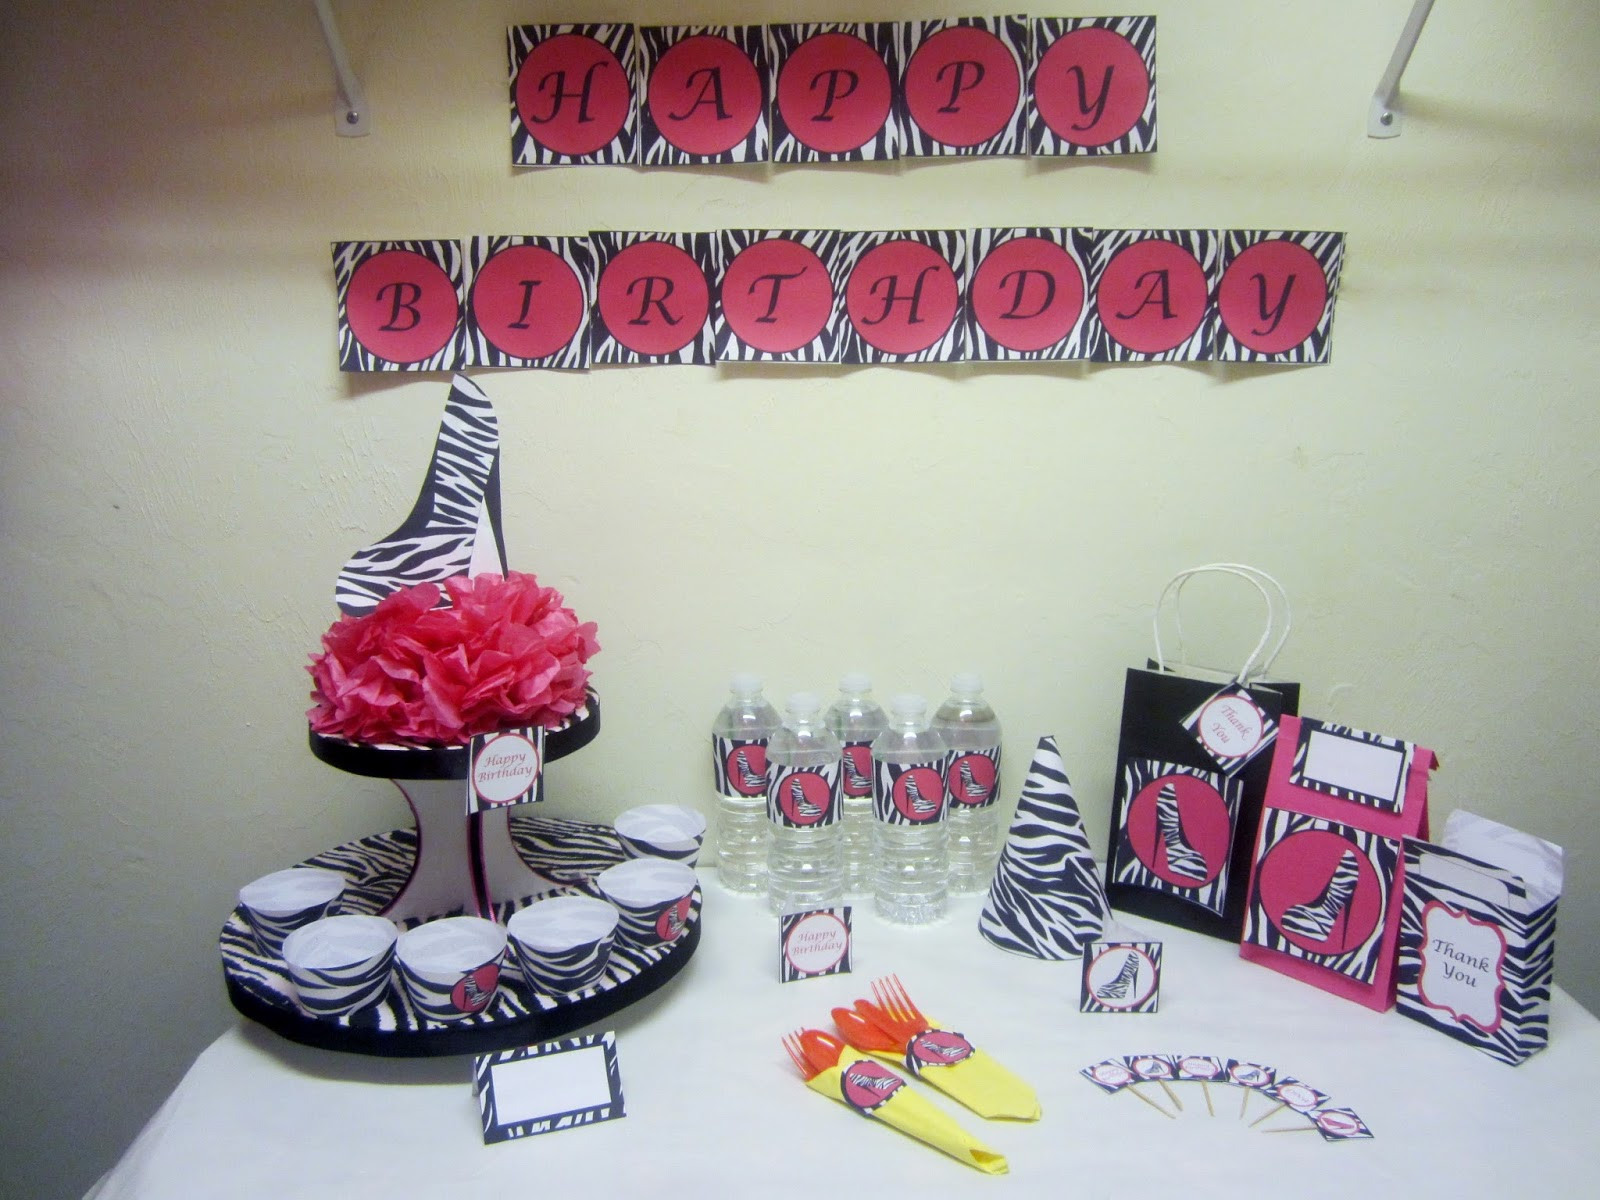 Diva Birthday Party Decorations
 DIY Party Decorations Sweet 16 Party Ideas Diva Hot